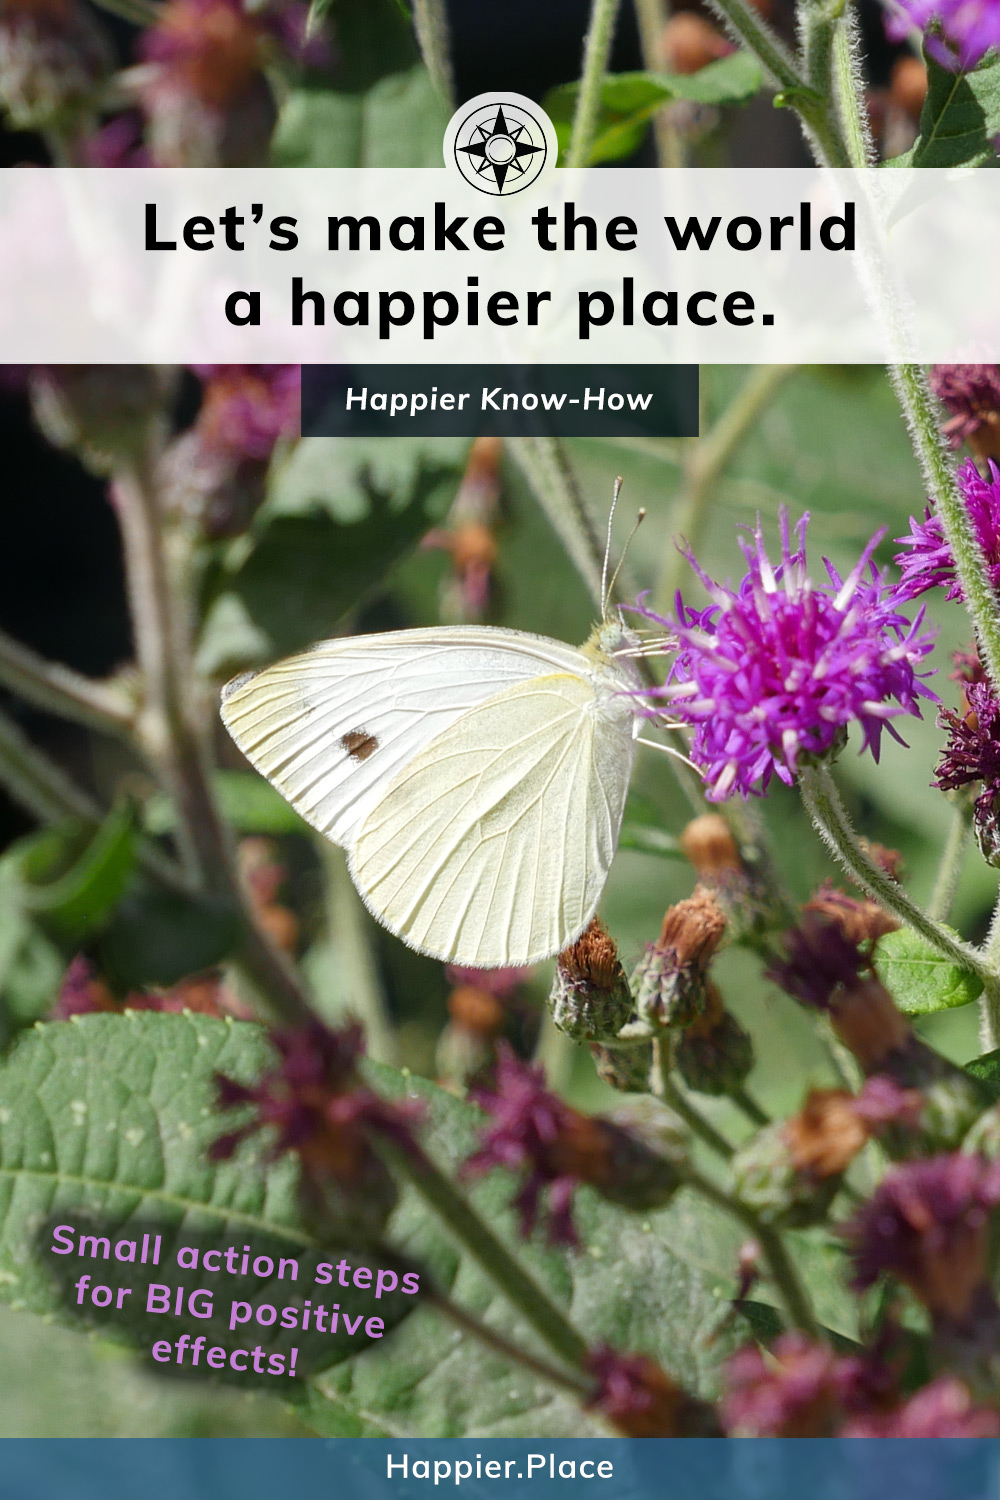 Let's make the world a happier place with action steps, butterfly, happier know-how